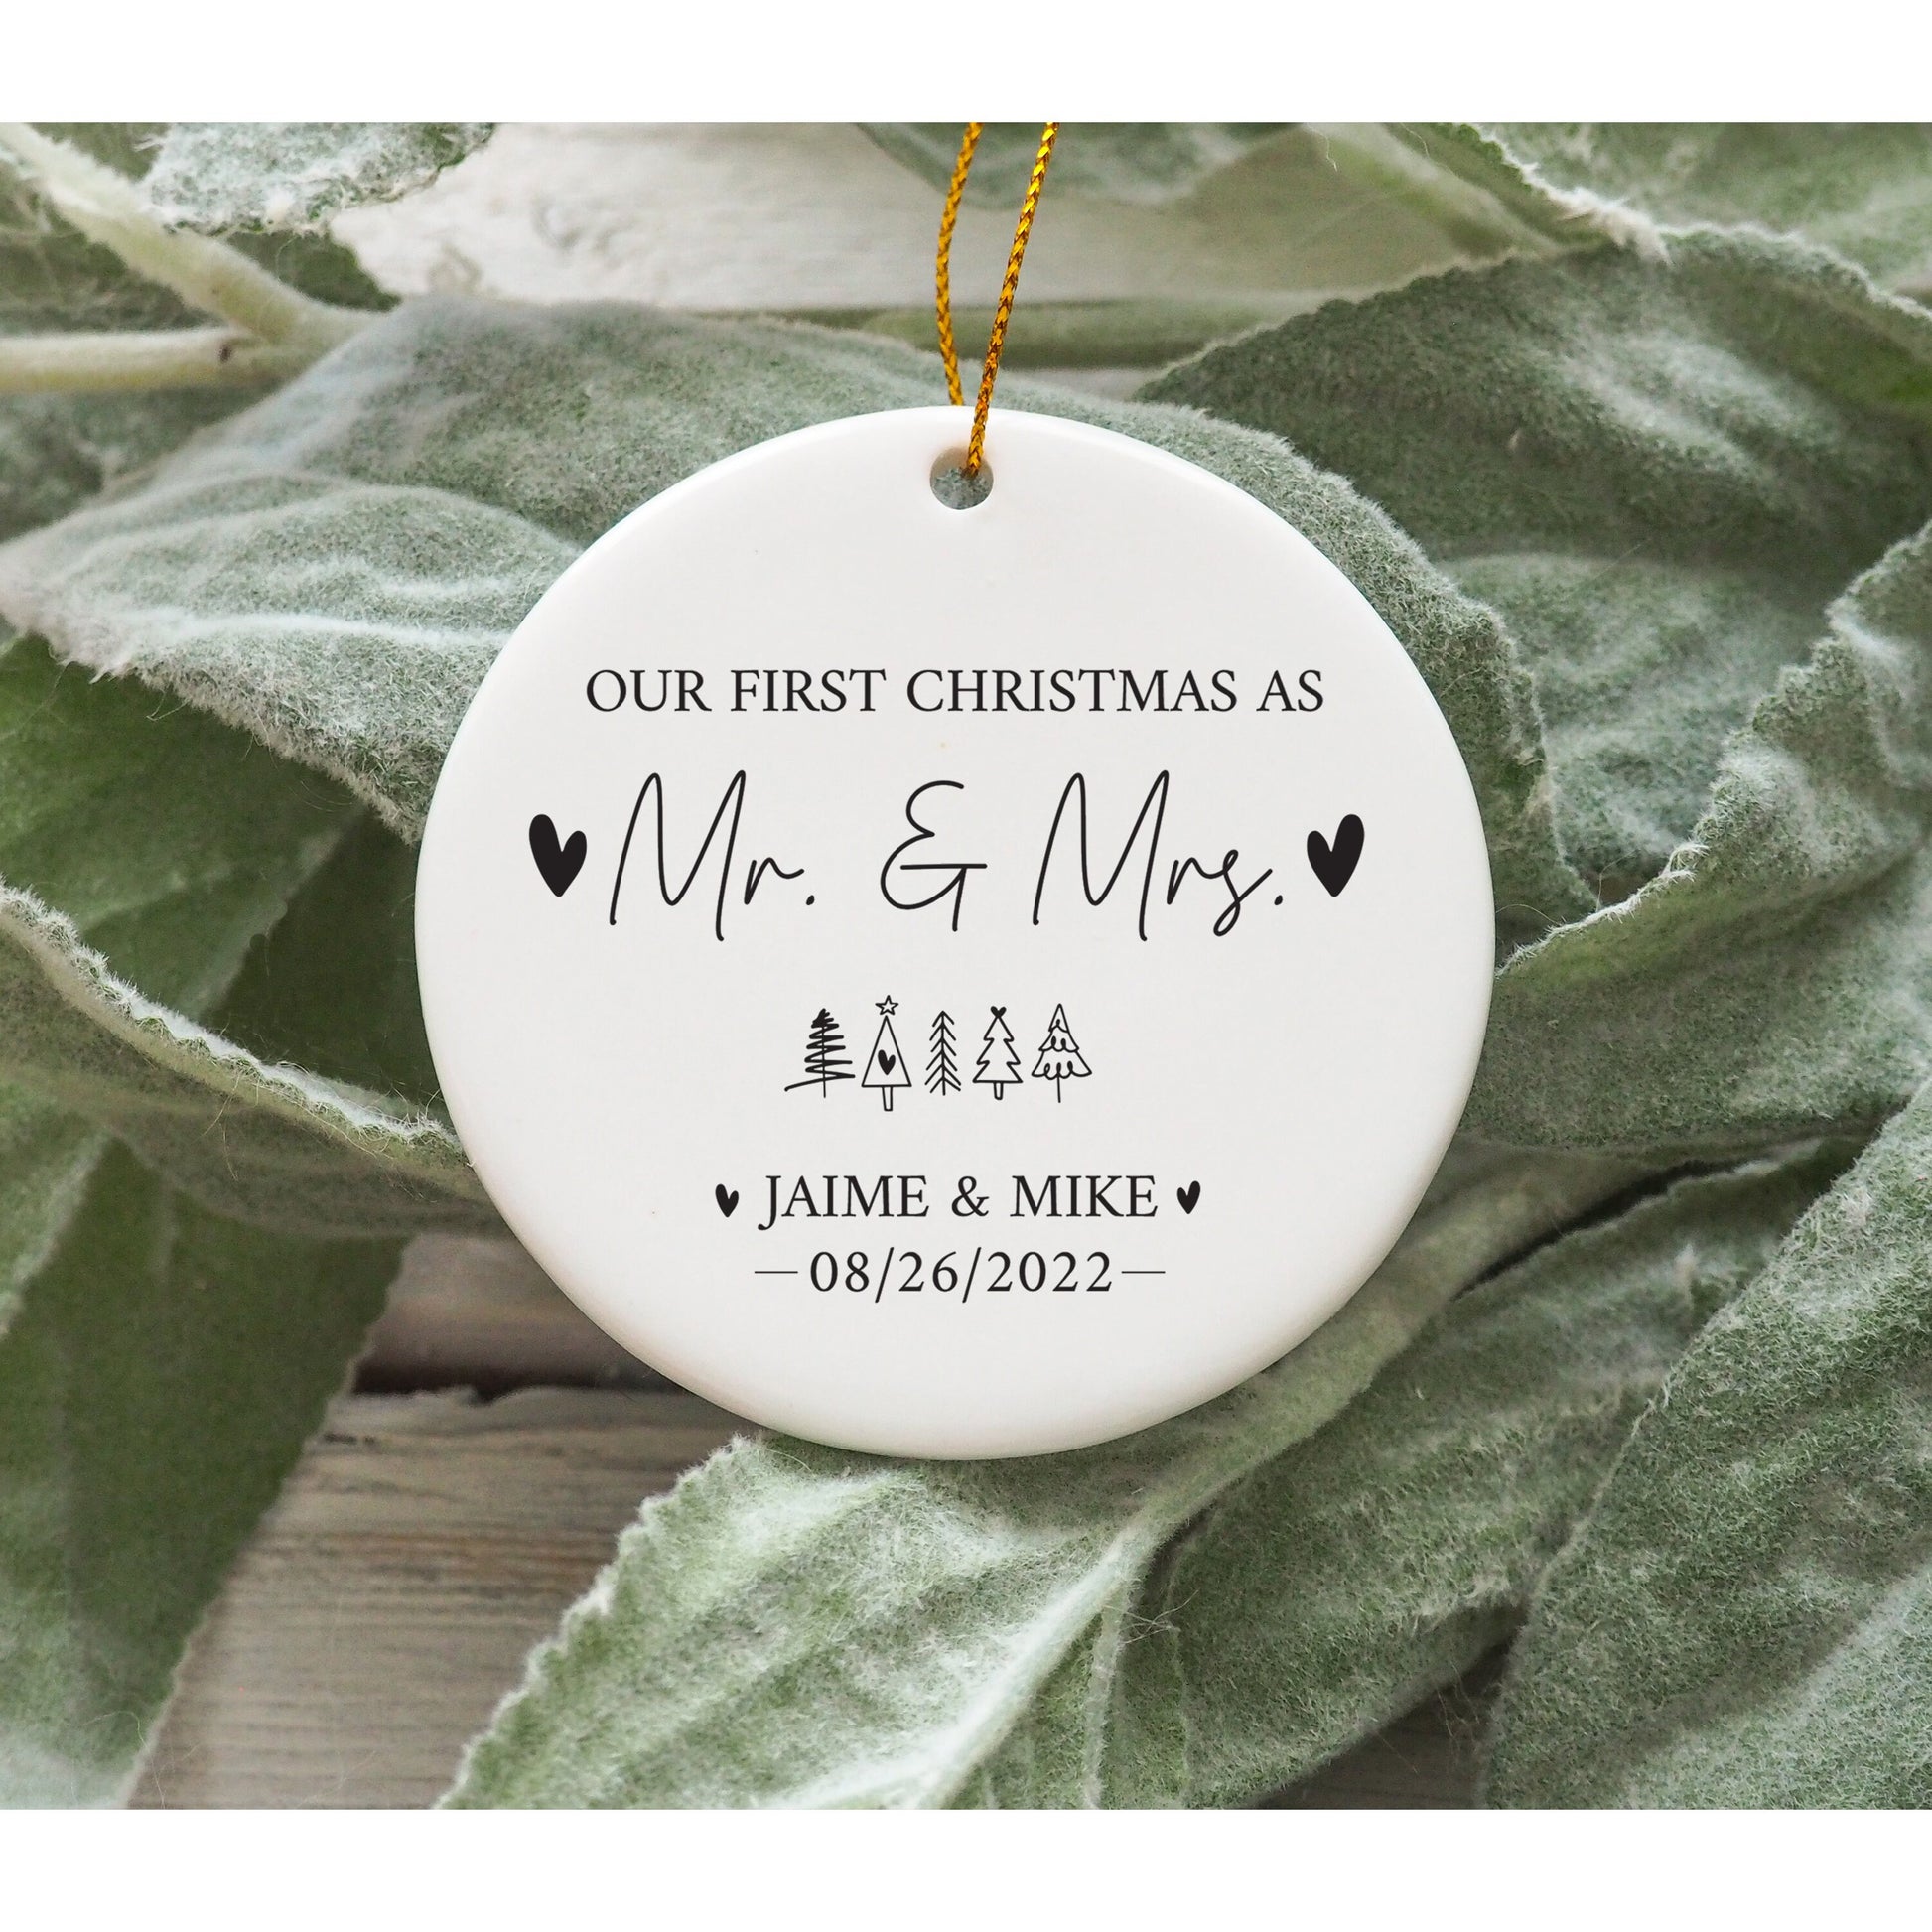 Custom Ornaments, Personalized Porcelain Ceramic Christmas Ornament, Holiday Ornaments, Christmas Gift, Wedding Gifts